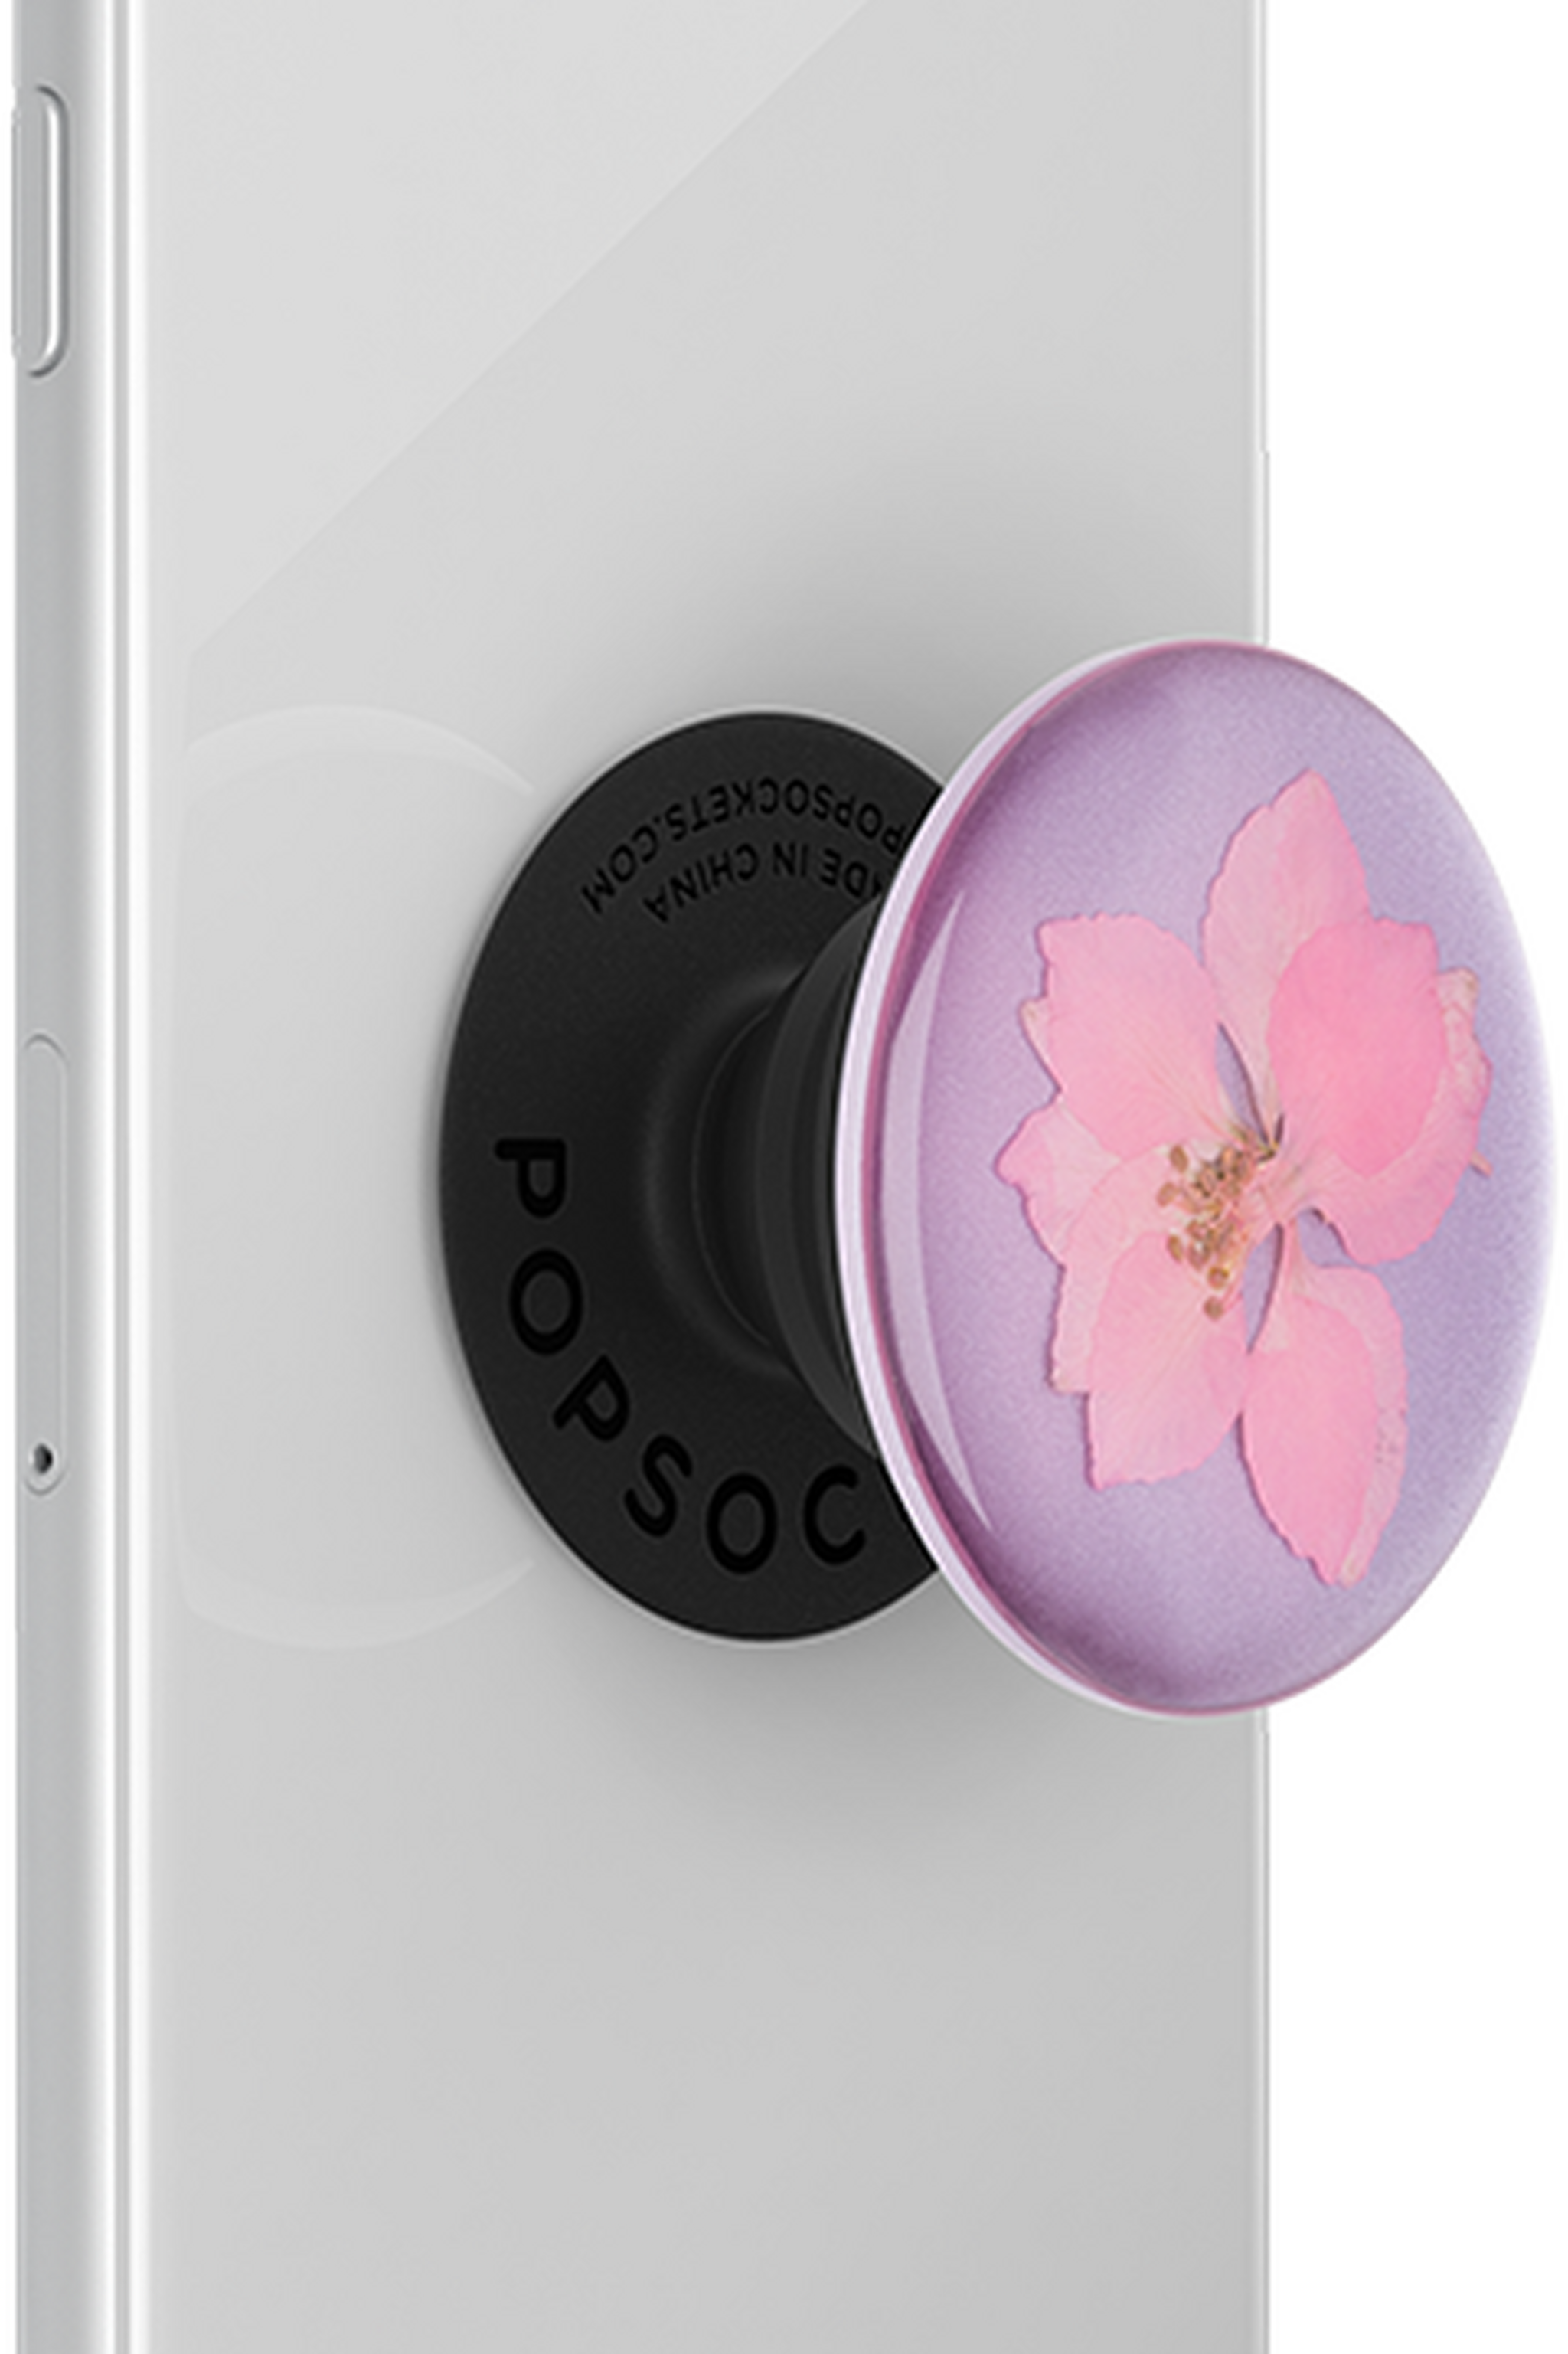 PopSockets Phone Stand and Grip (801238) – Pressed Flower Delphinium Pink